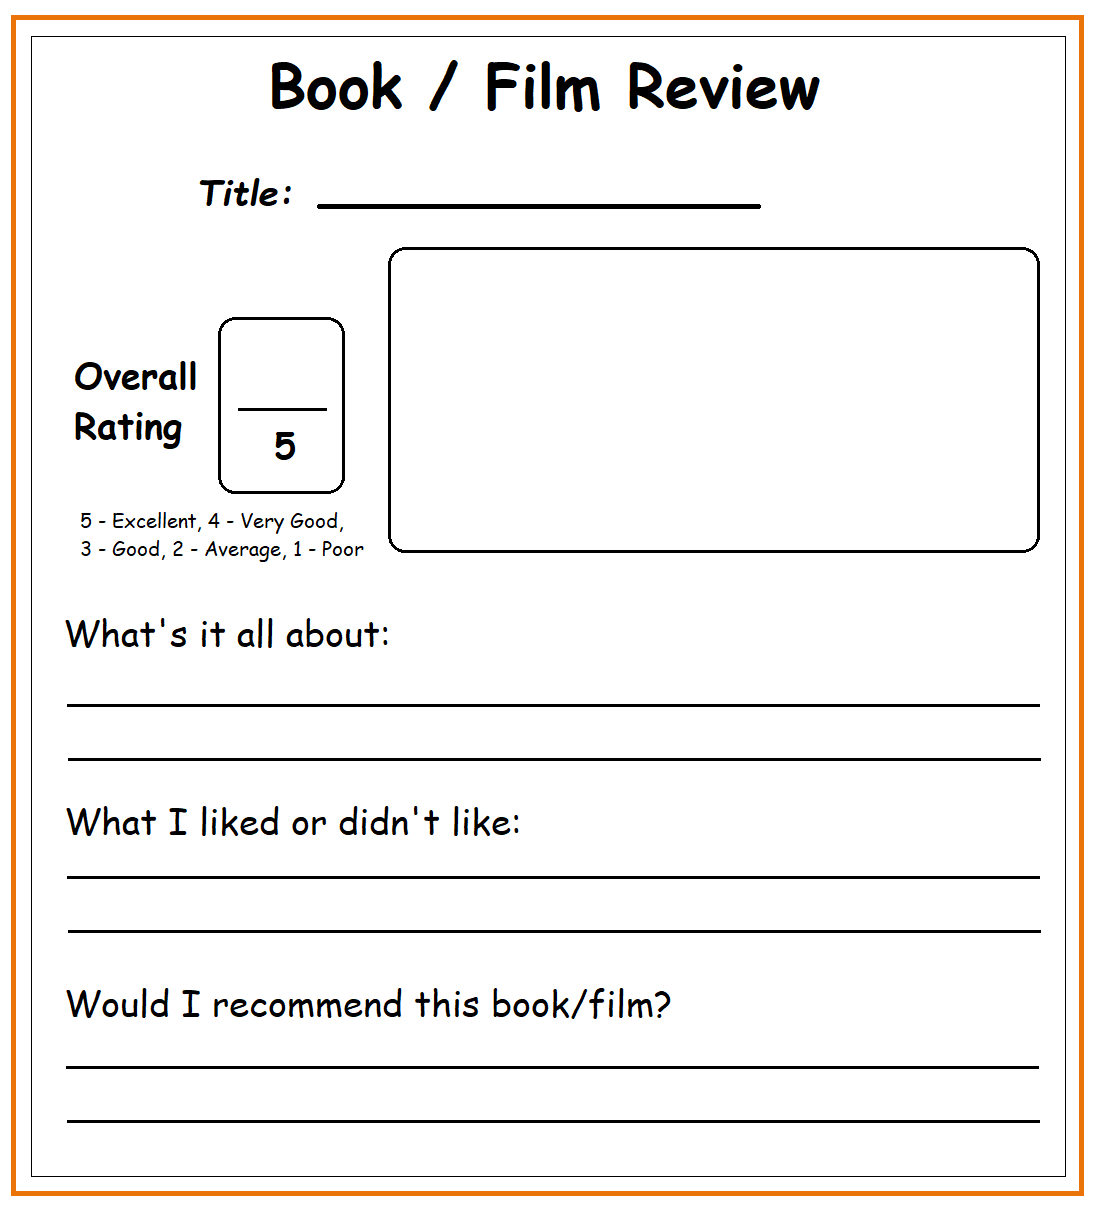 book / film review poster